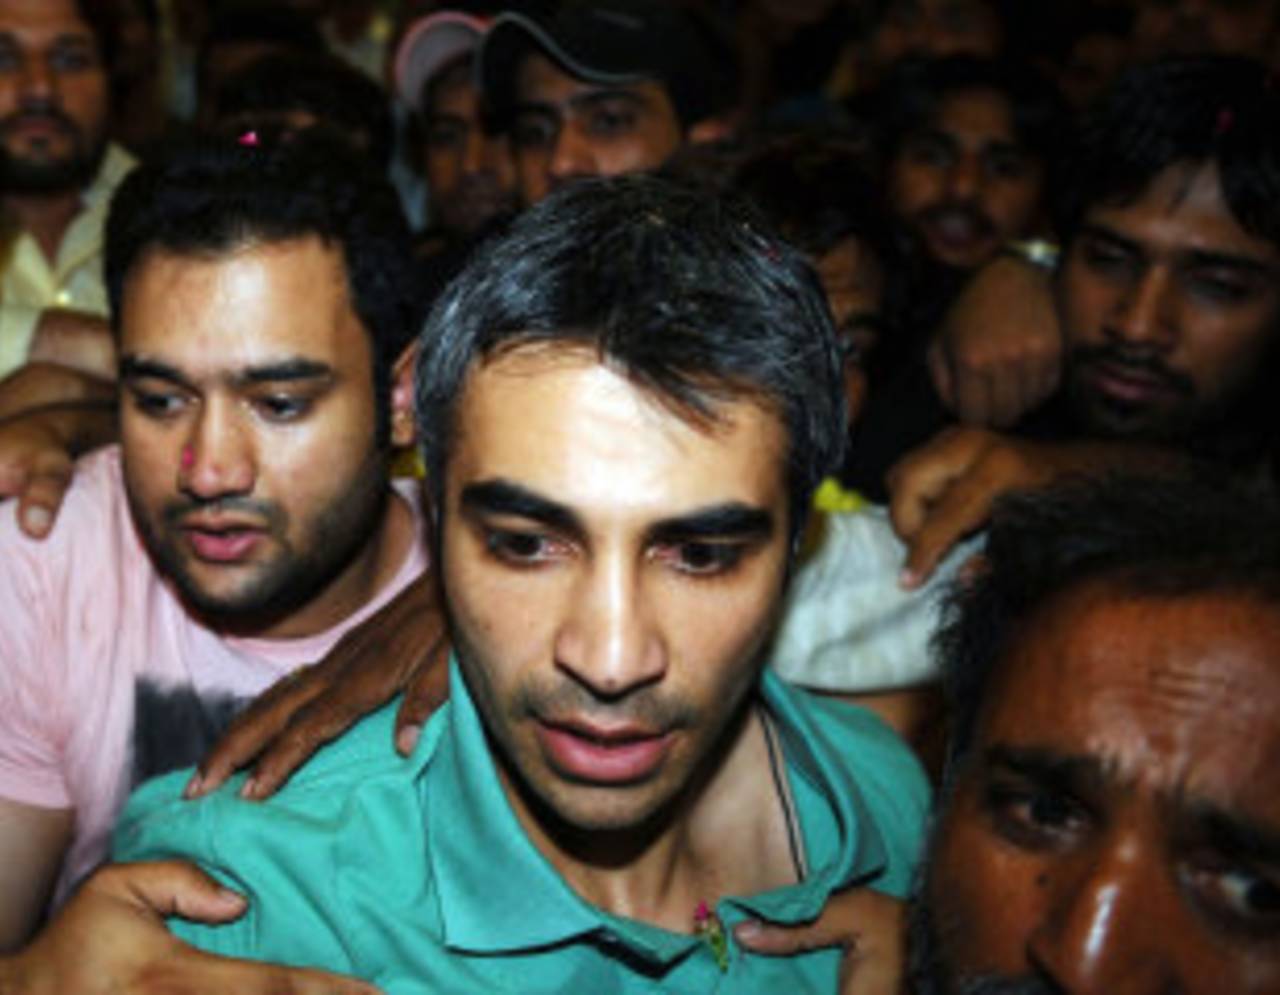 Salman Butt at Lahore airport after his release from jail, June 22, 2012